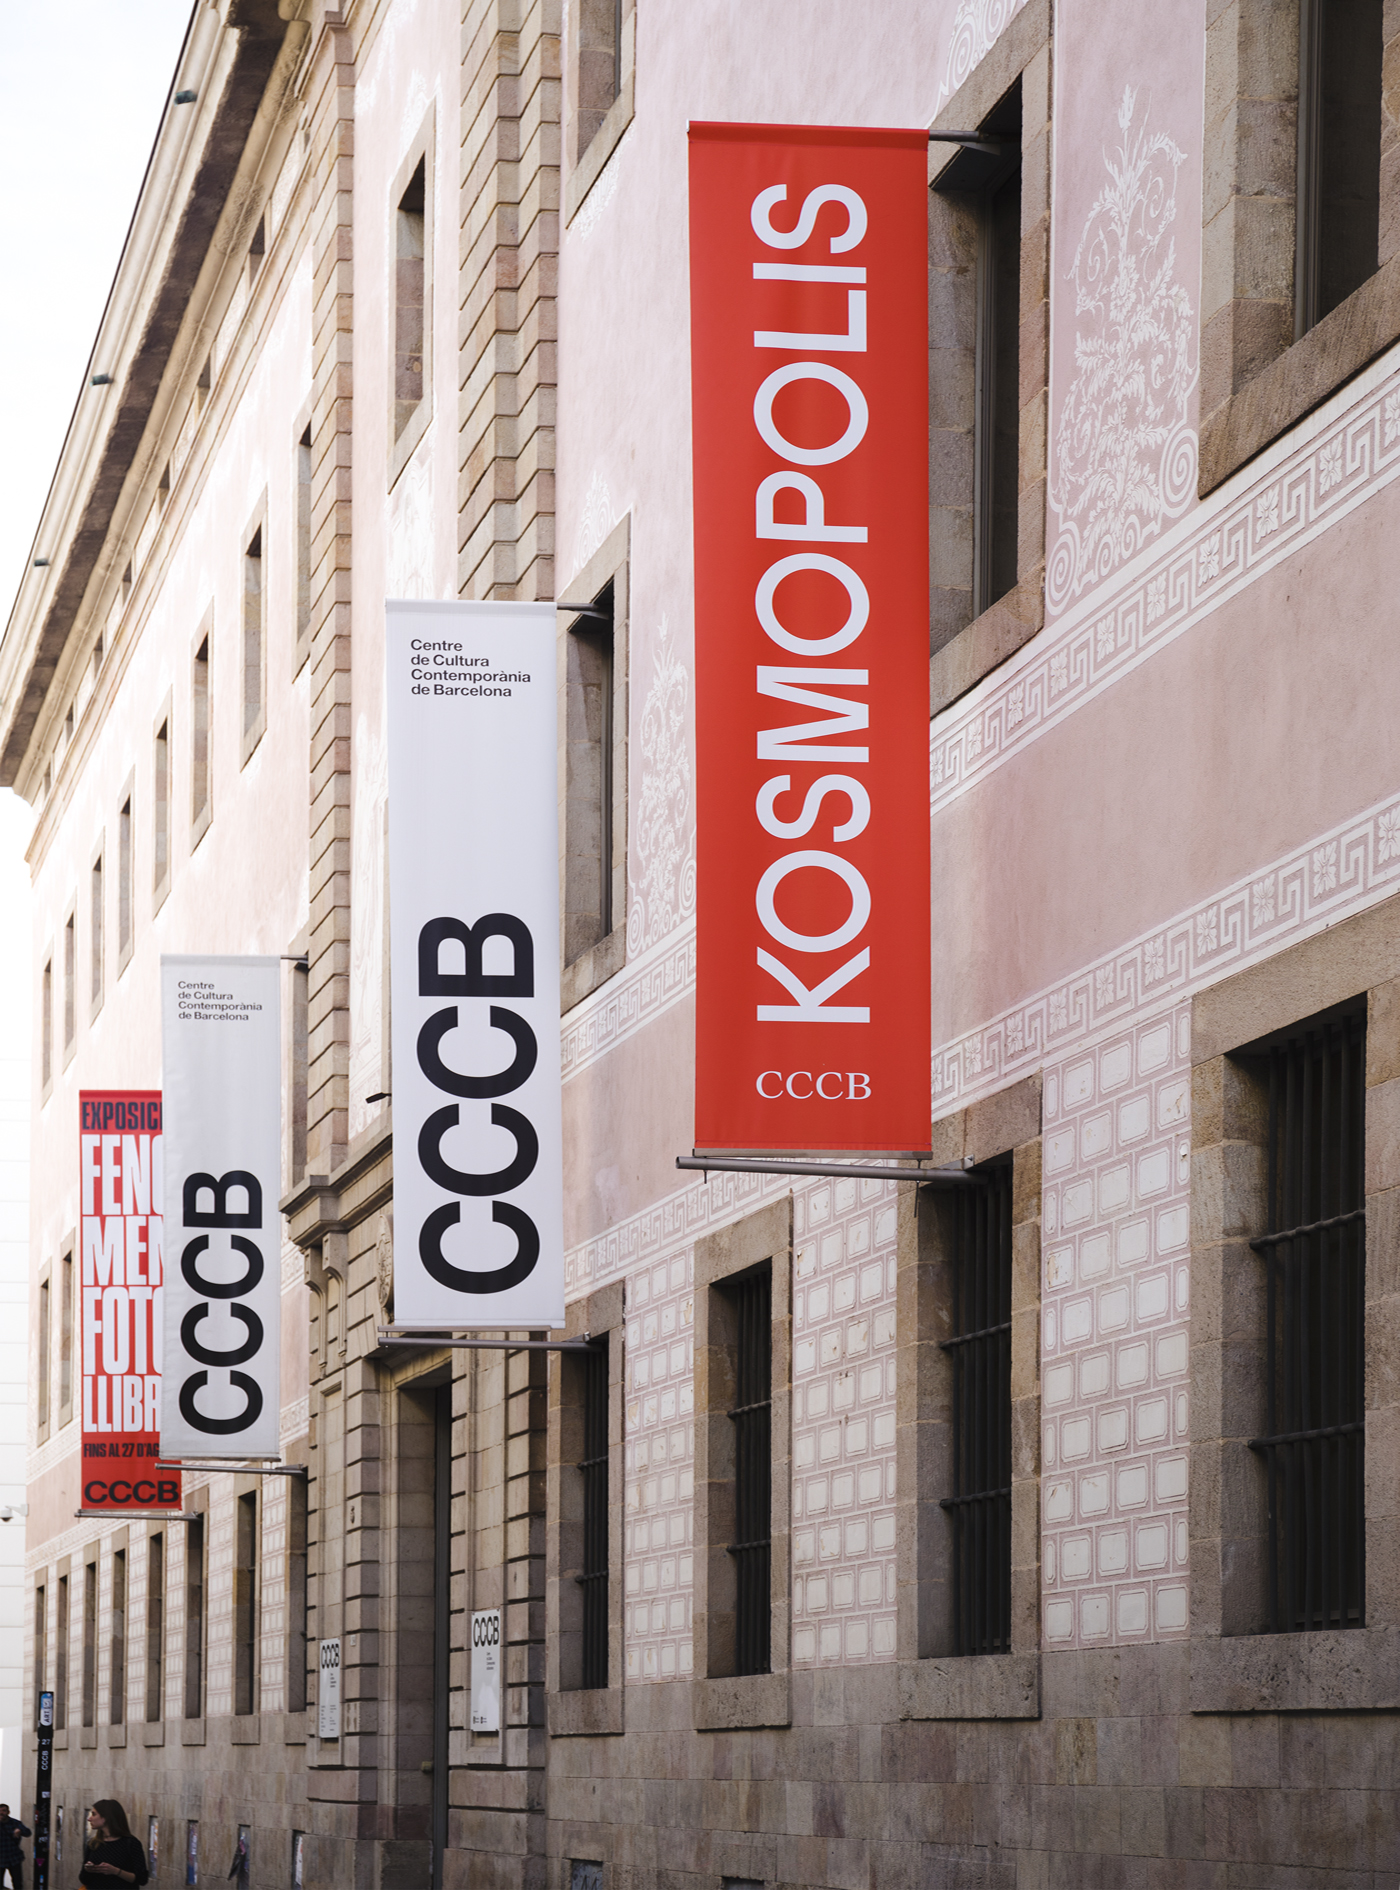 Visual identity and signage by Hey for Barcelona literature festival Kosmopolis